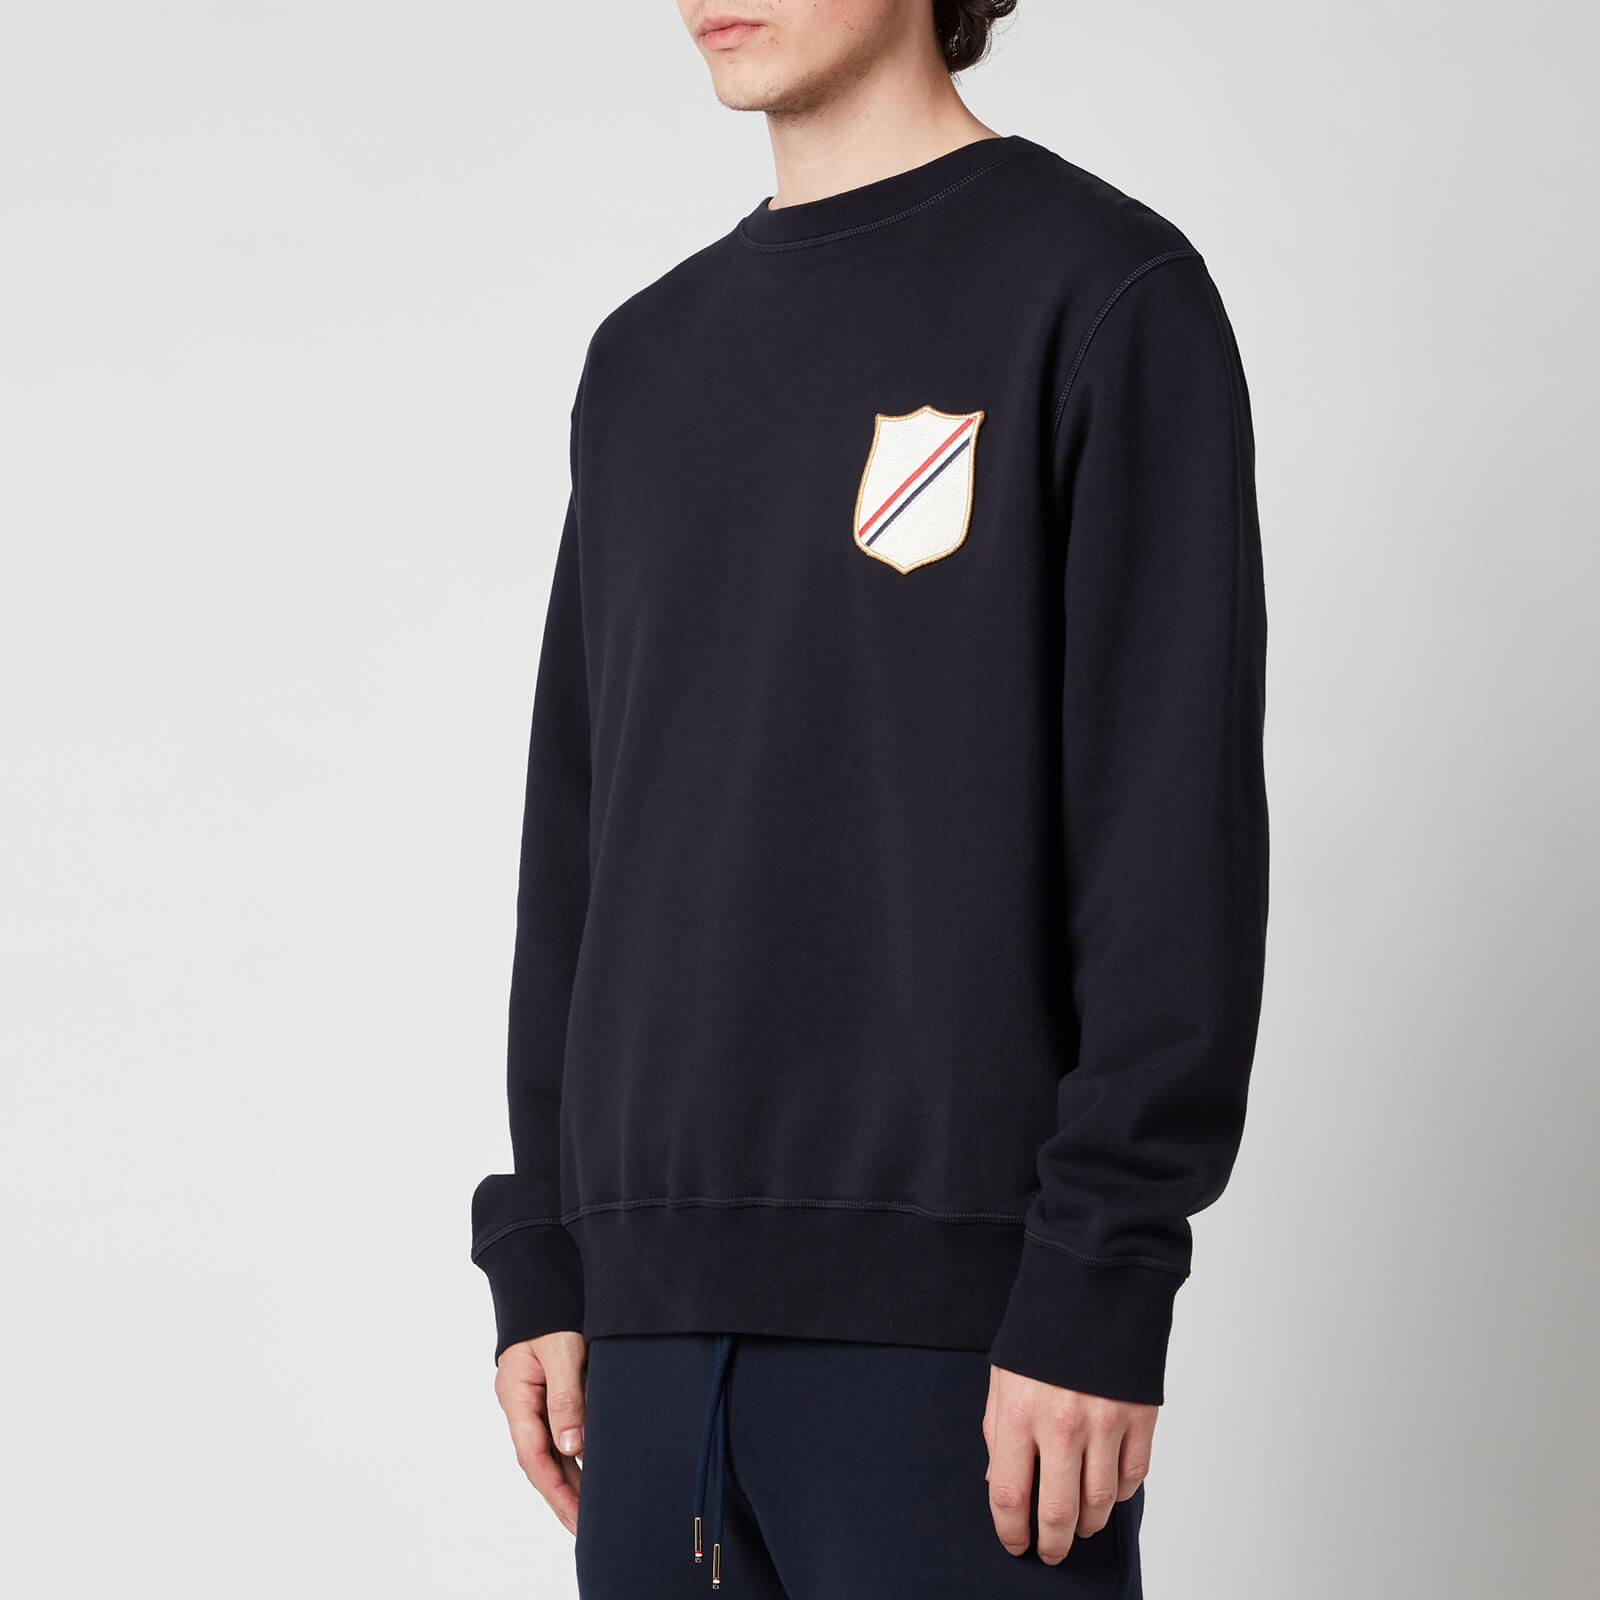 Thom Browne Men's Embroidered Crest Patch Boat Neck Sweatshirt - Navy - 1/S